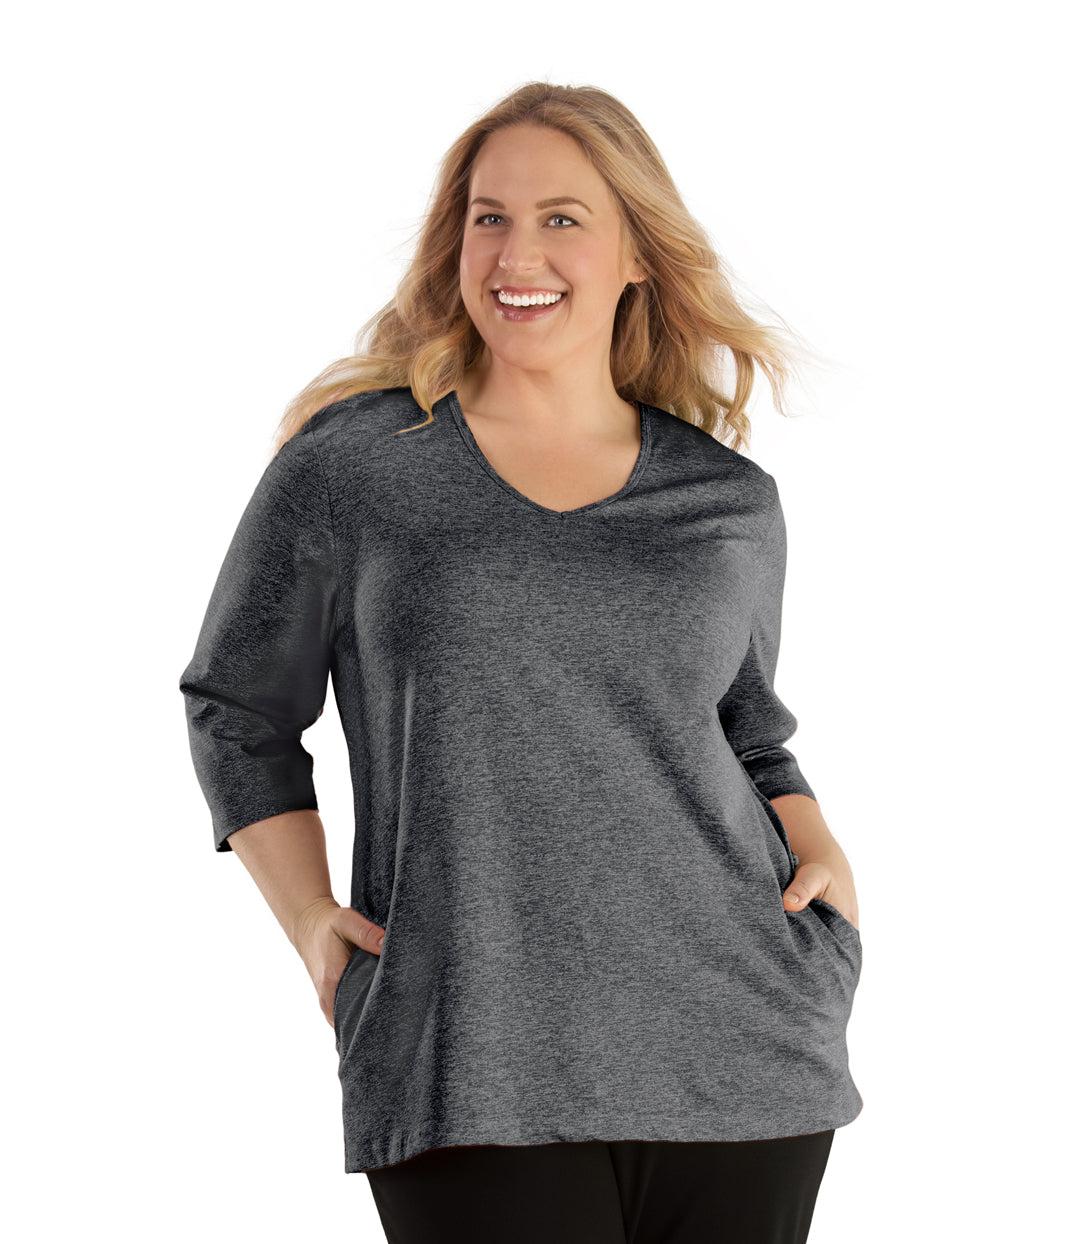 Plus size woman, facing front, wearing JunoActive plus size SoftWik V-Neck ¾ Sleeve Top with Pockets in the color Heather Grey. She is wearing JunoActive Plus Size Leggings in the color Black.